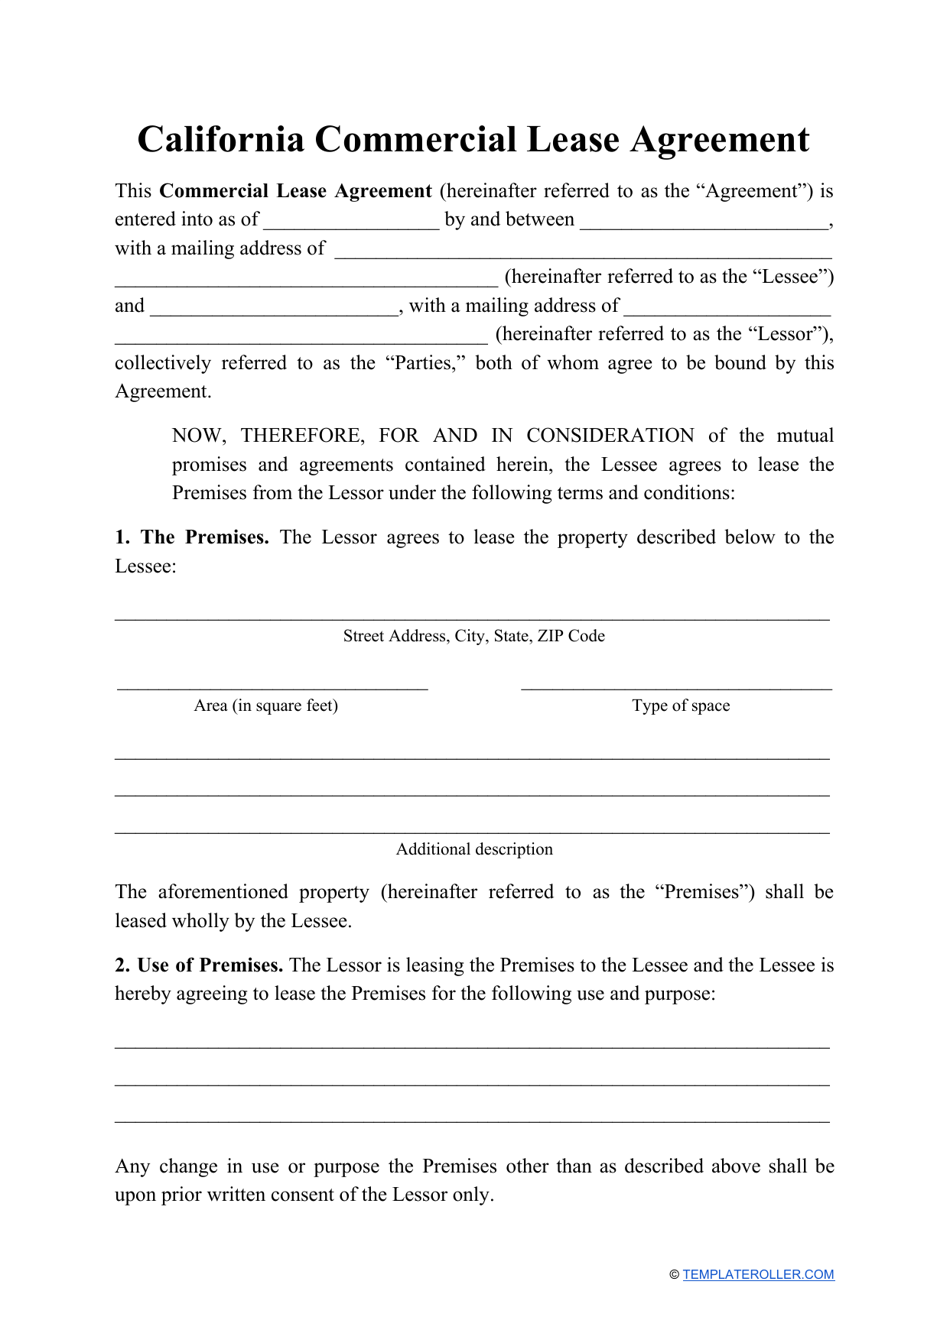 California Commercial Lease Agreement Template Download Printable Pdf Templateroller